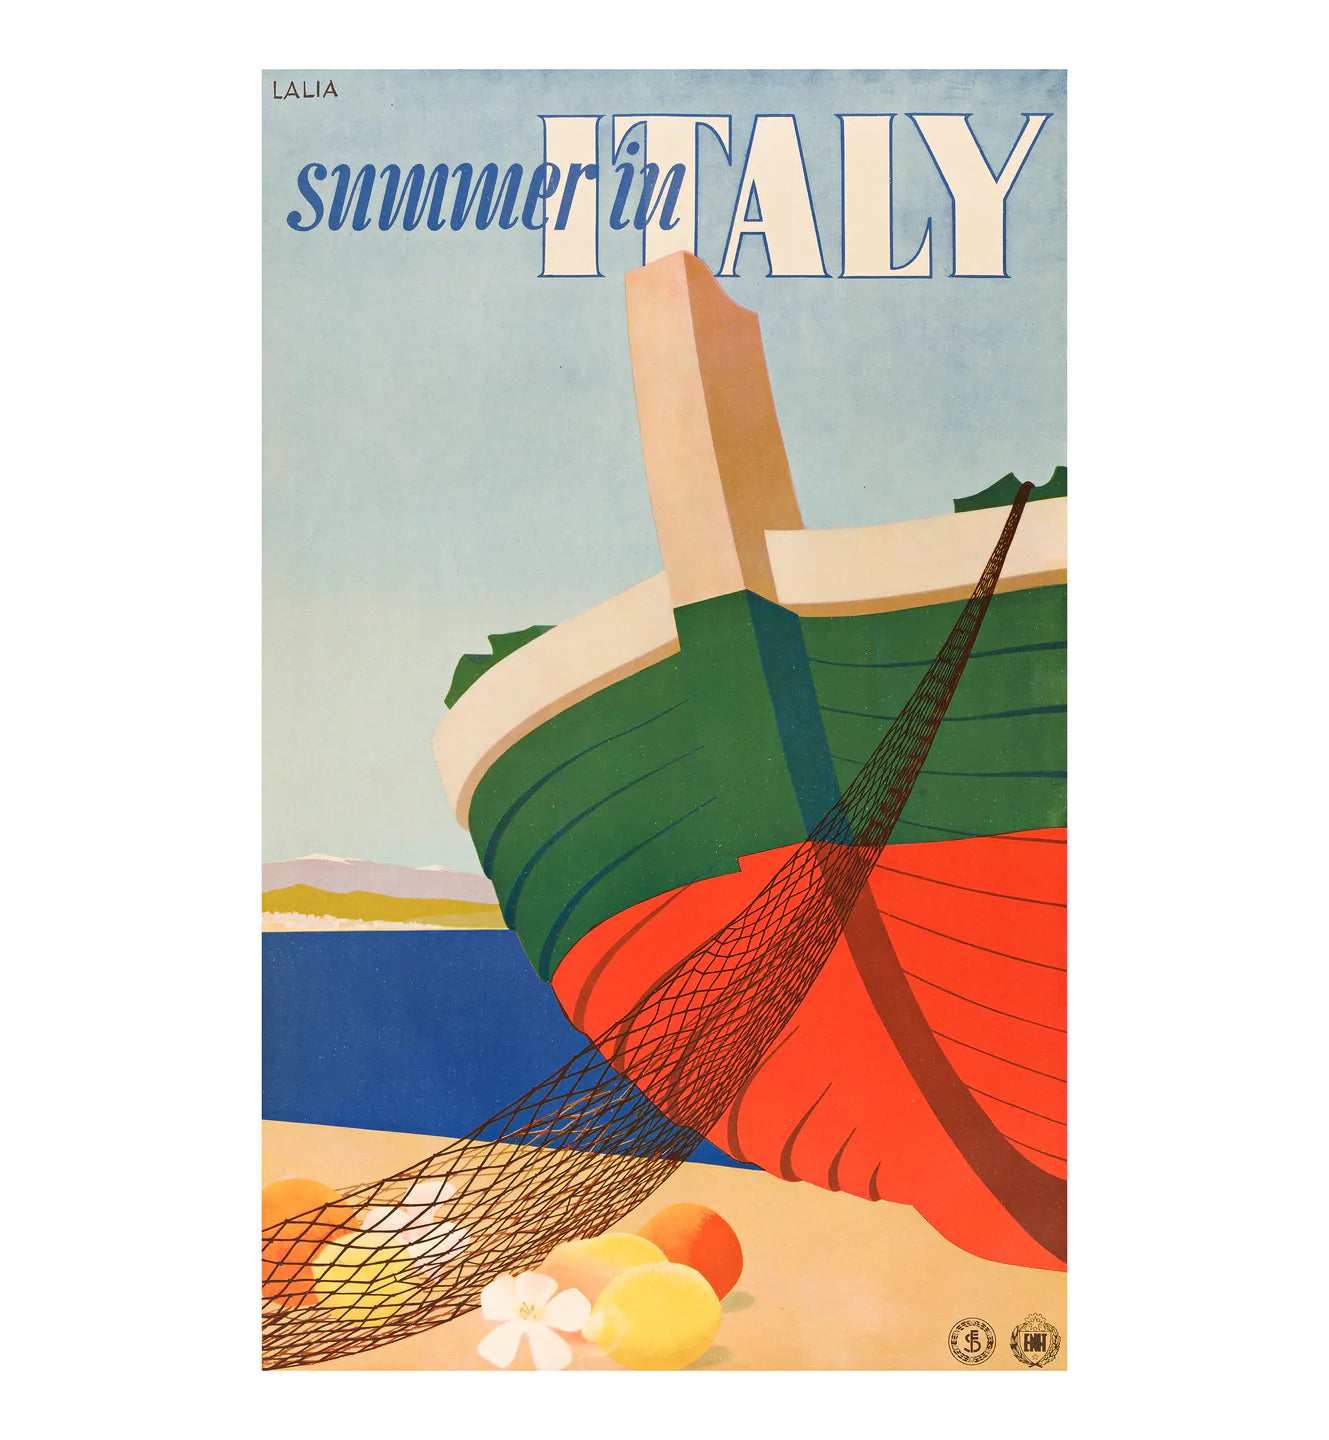 2023 Italy: Vintage Travel Posters - Square Wall Calendar